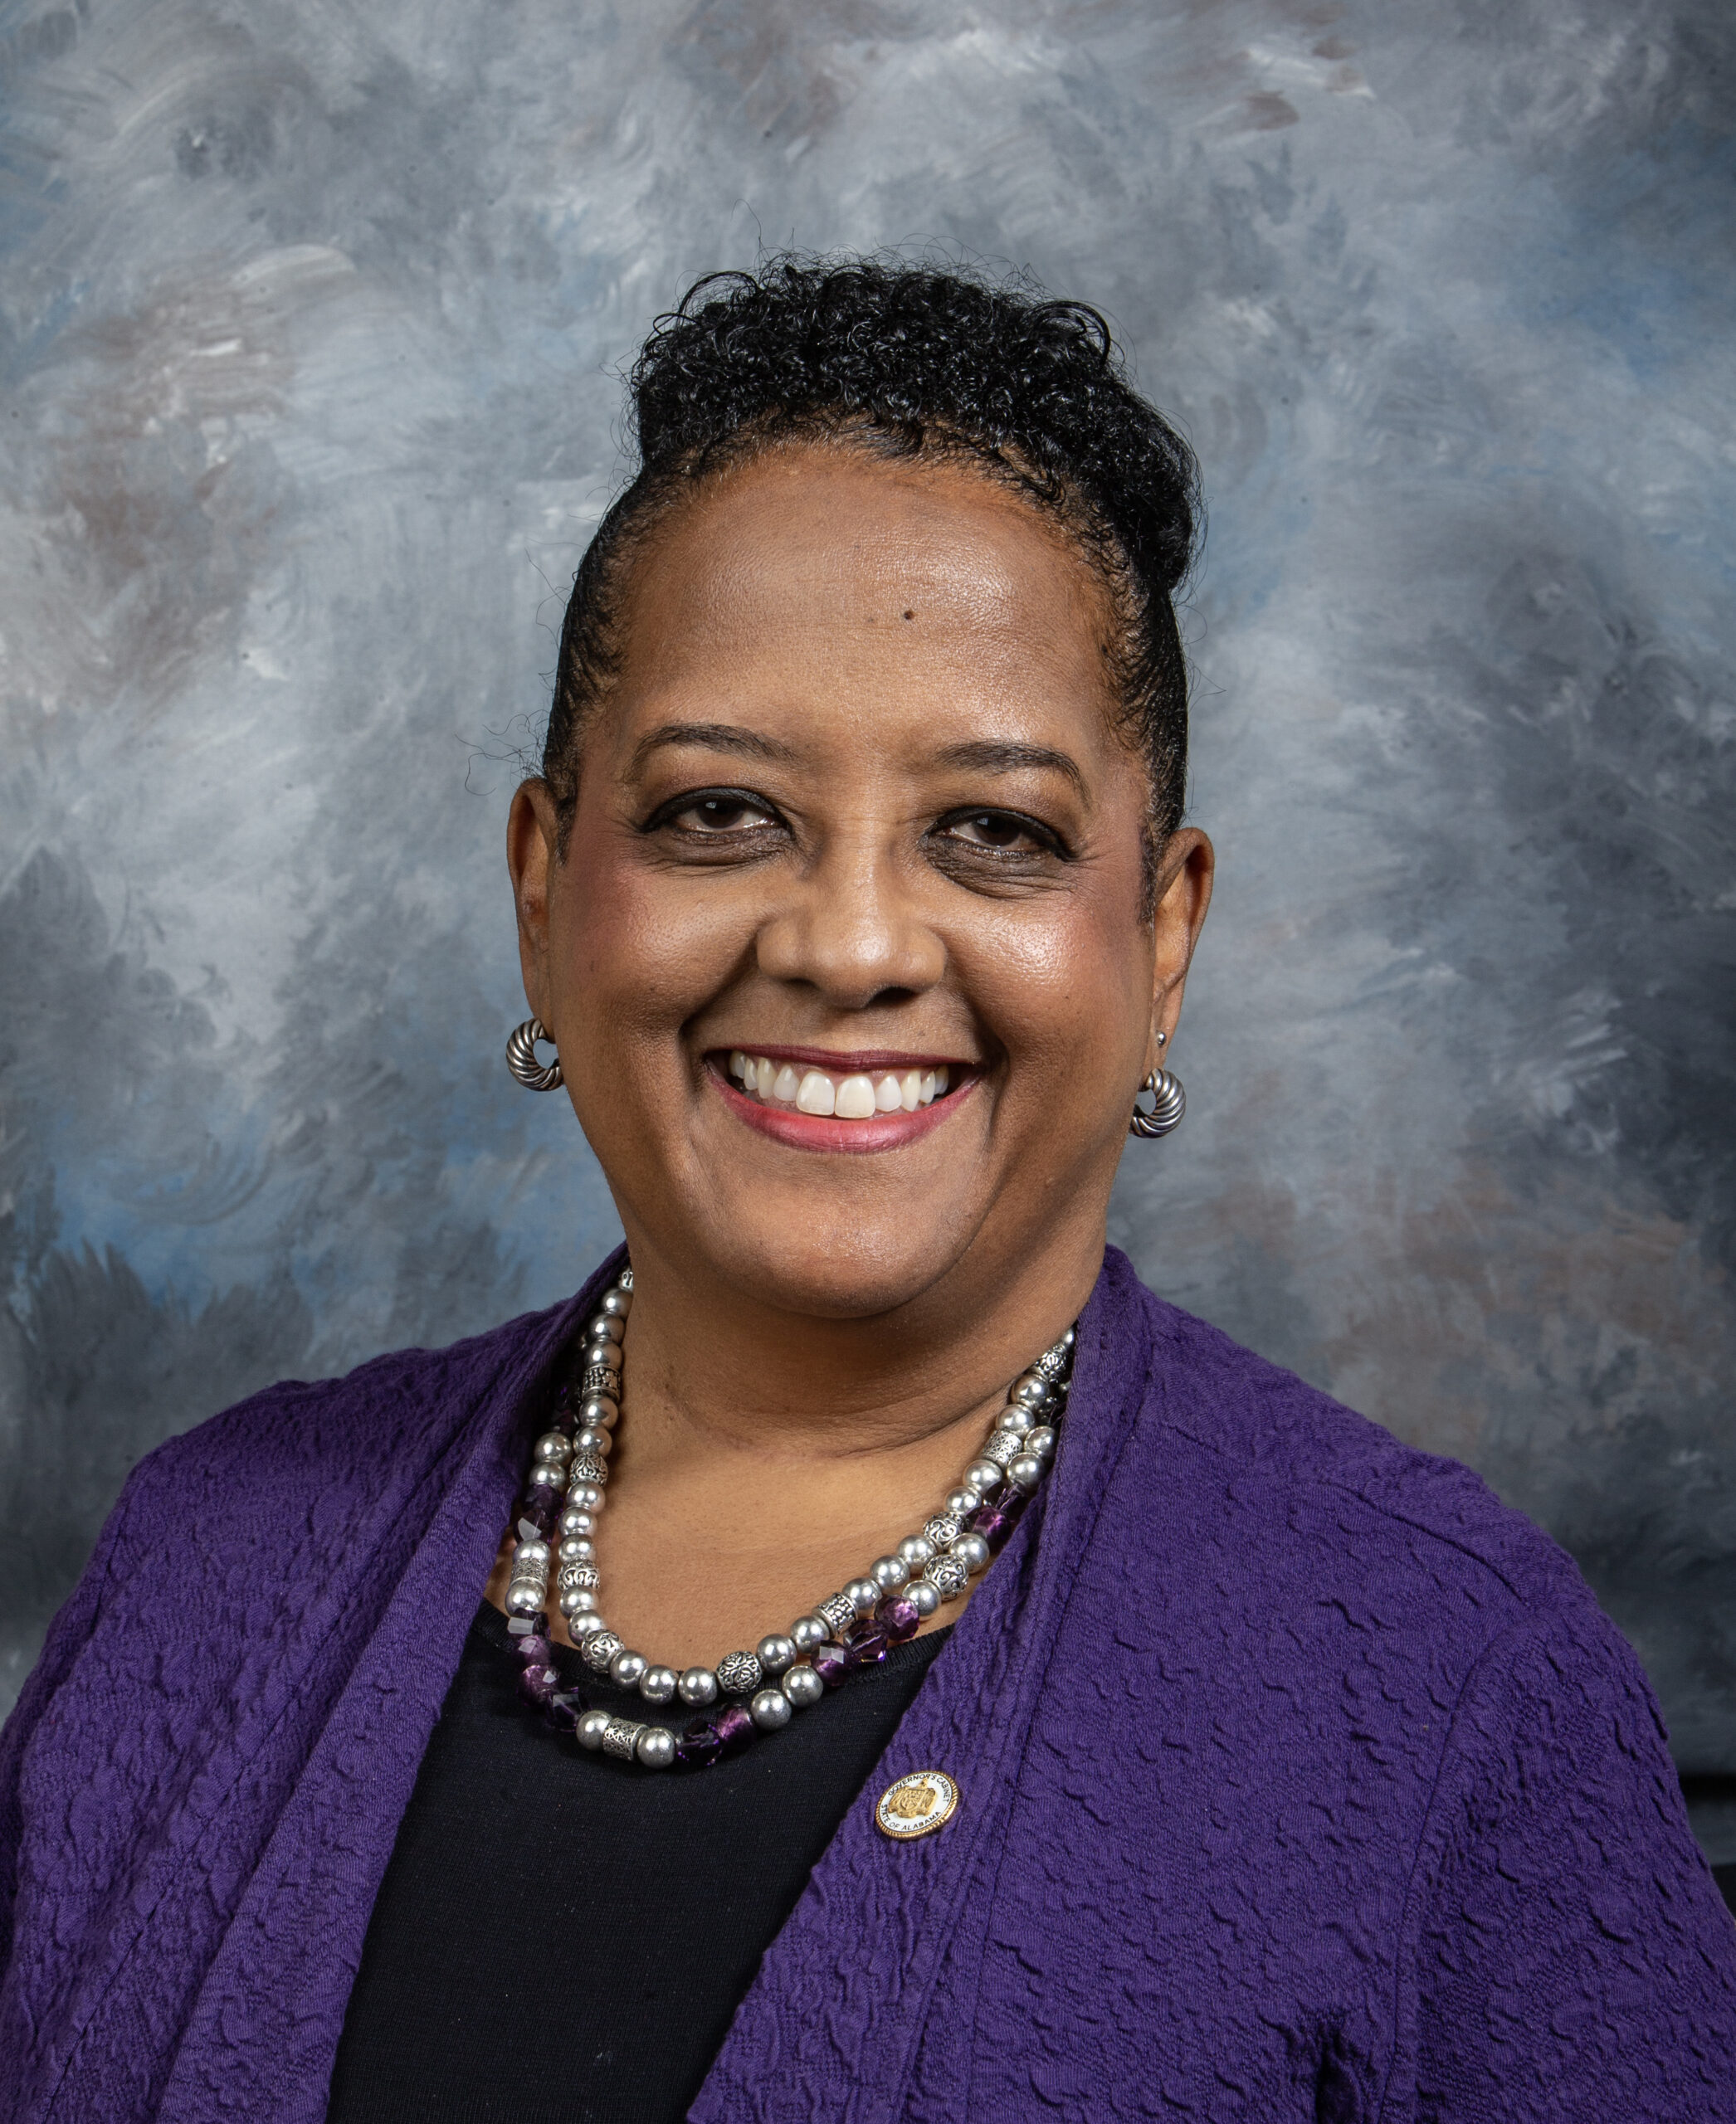 Governor Ivey Taps Small Business Champion and Former Air Force Captain Stacia Robinson to Lead Alabama Office of Minority Affairs